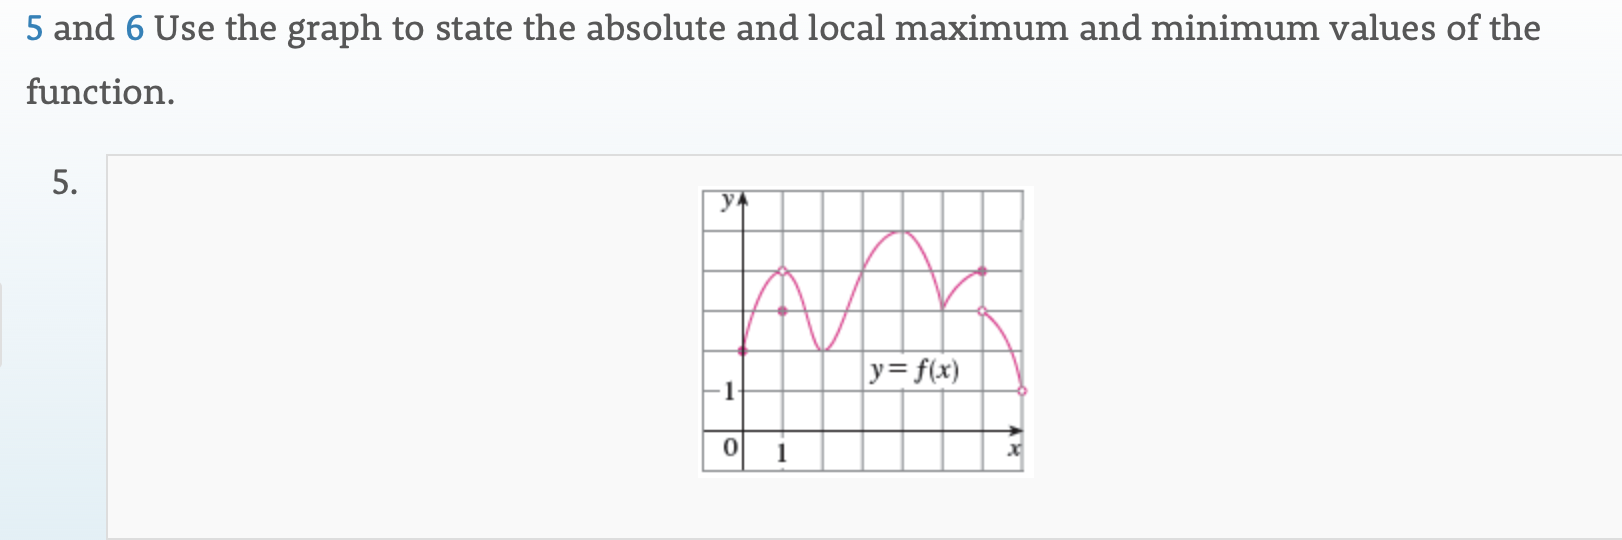 5 and 6 Use the graph to state the absolute and local maximum and minimum values of the
function
5.
УА
y= f(x)
